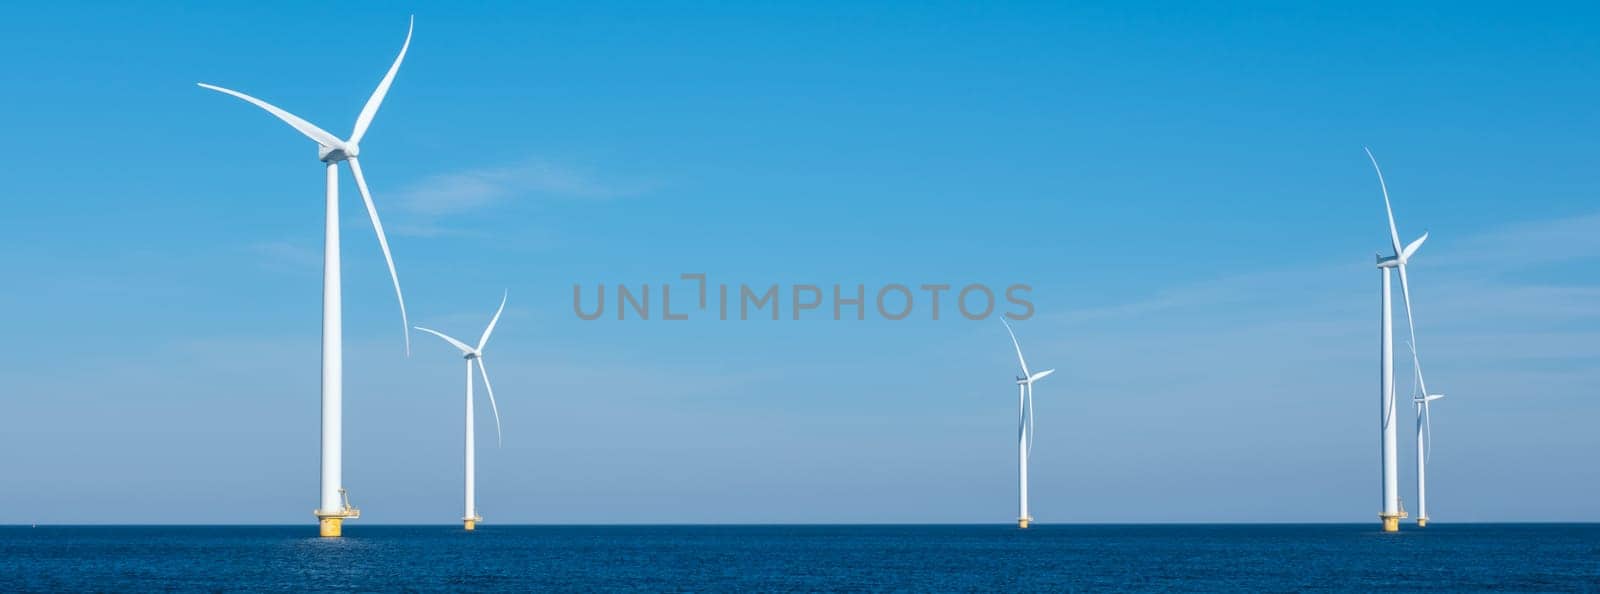 A mesmerizing view of a row of wind turbines gracefully spinning in the vast ocean, capturing the power of renewable energy by fokkebok